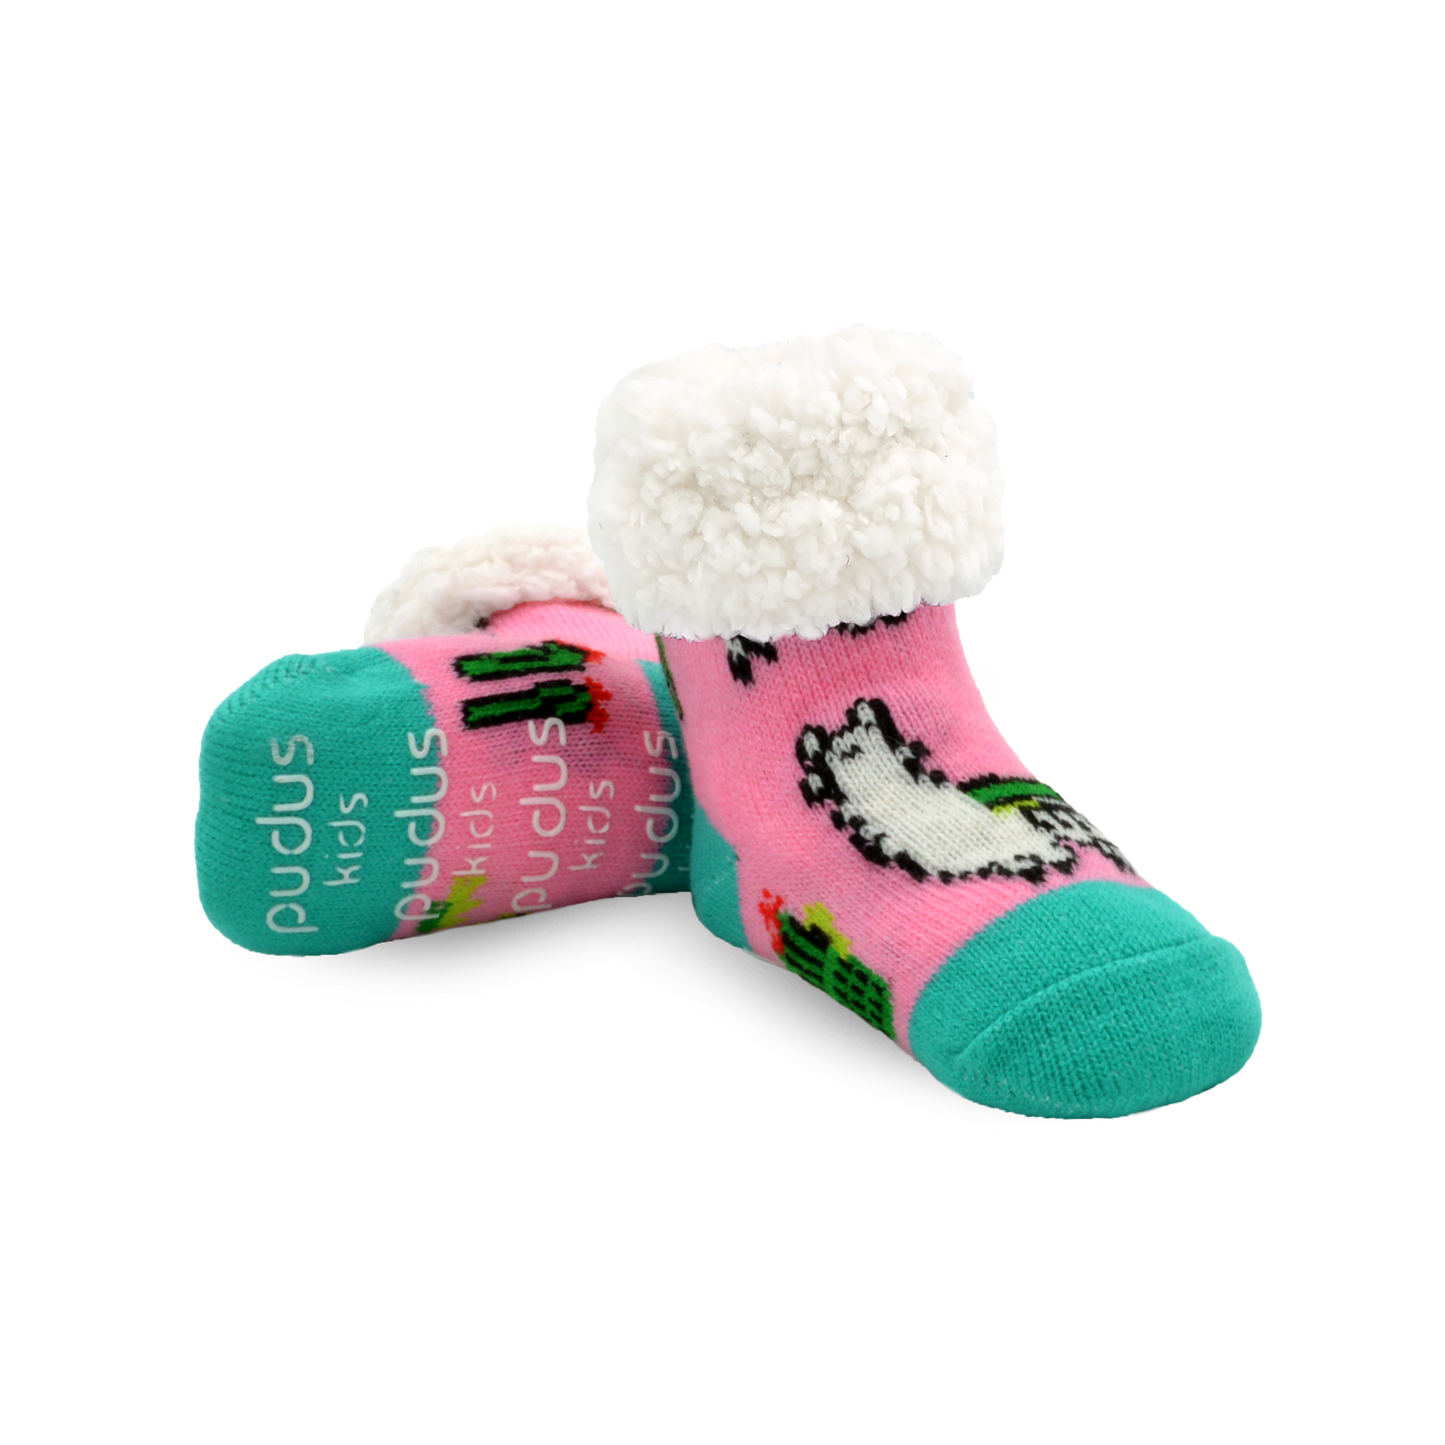 Pudus Cozy Winter Slipper Socks for Kids with Non-Slip Grippers and Faux Fur Sherpa Fleece - Boy and Girl Fuzzy Socks (Ages 4-7) Llama Pink - Classic Slipper Sock Kids